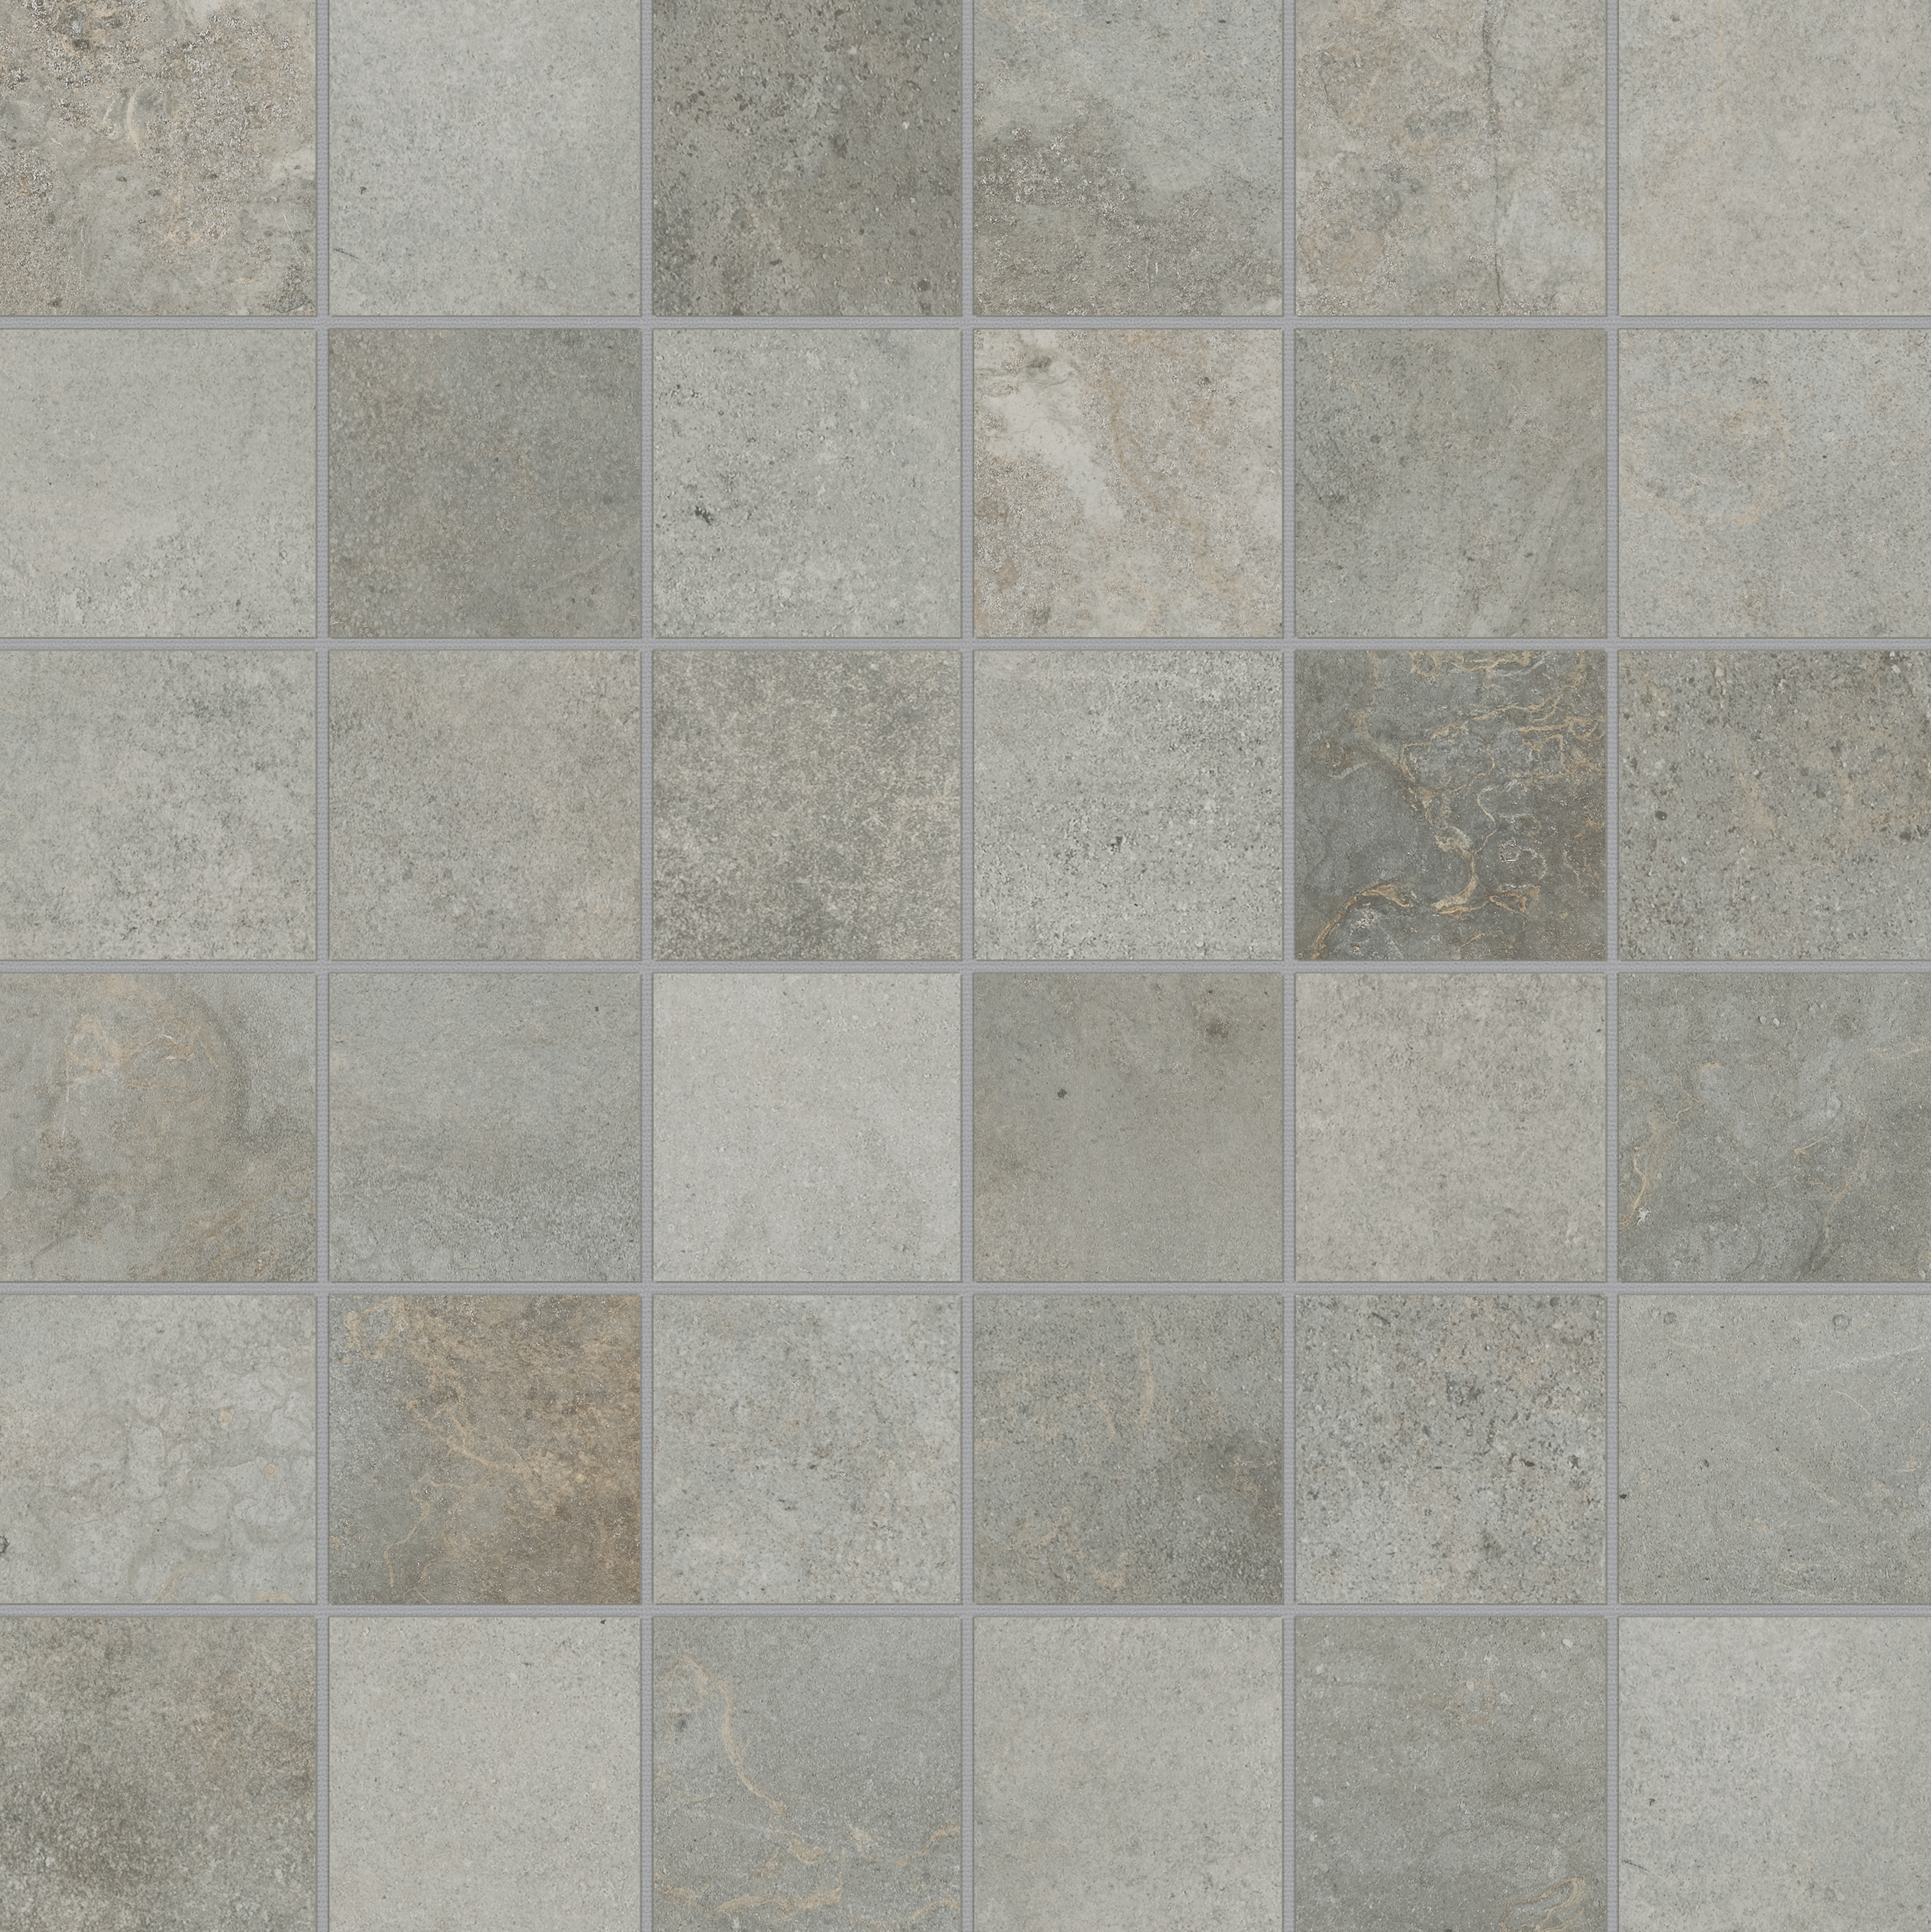 chromium straight stack 2x2-inch pattern color body porcelain mosaic from ceraforge anatolia collection distributed by surface group international matte finish straight edge edge mesh shape